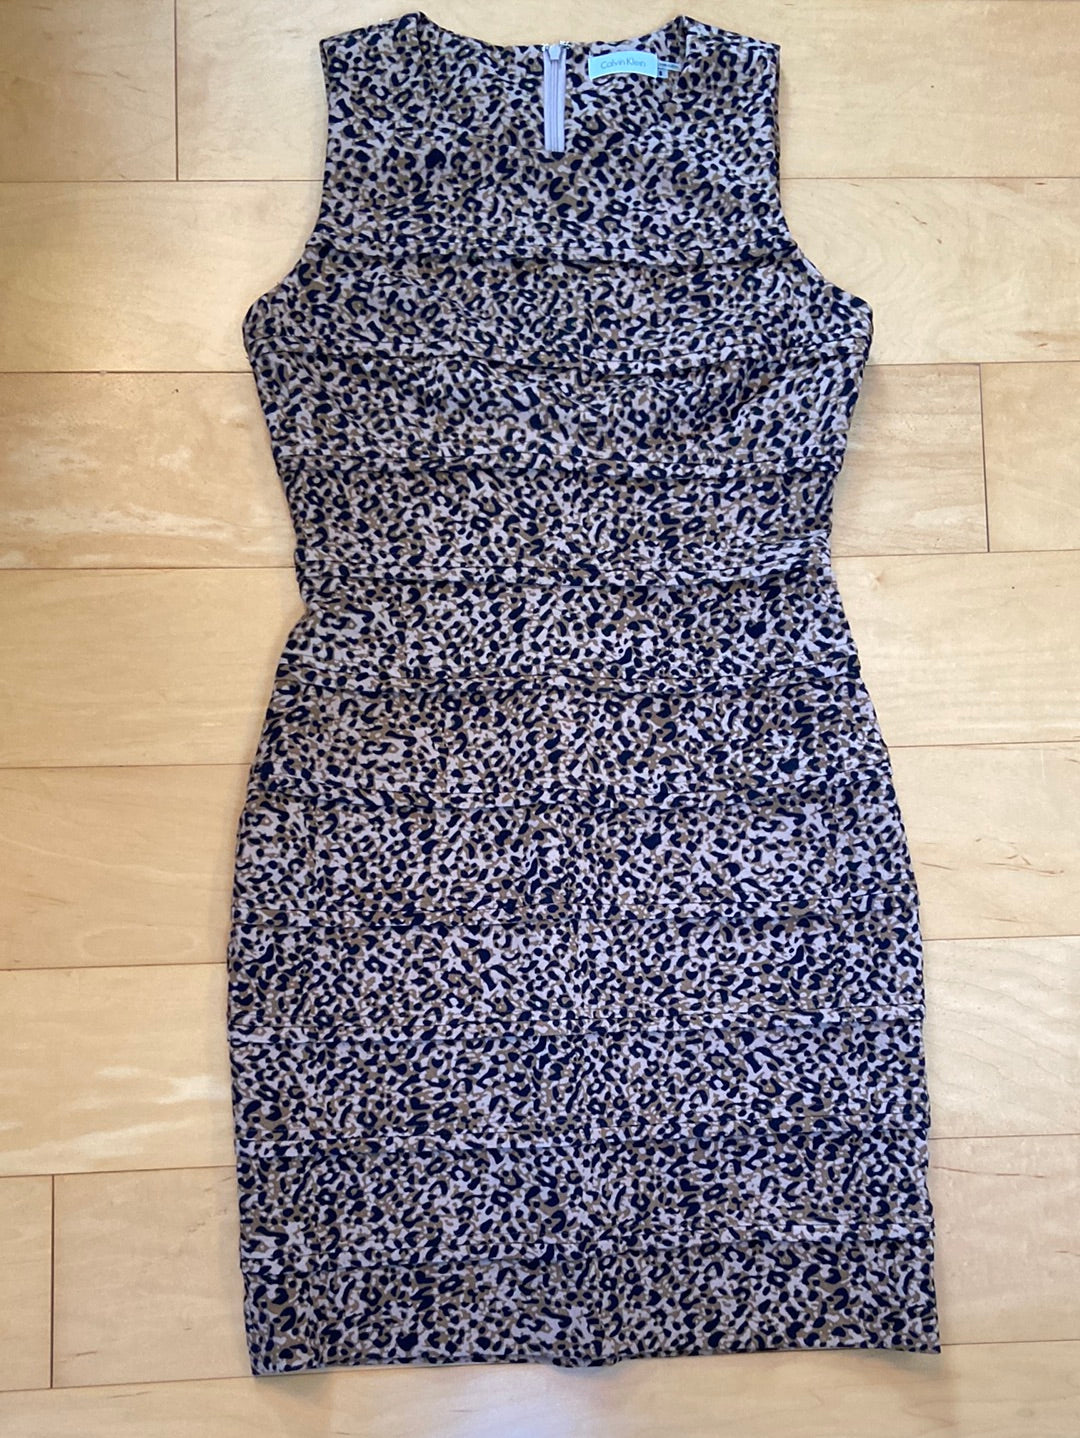 Sleeveless shift dress in brown and black animal print with tiered bodice and skirt knee length